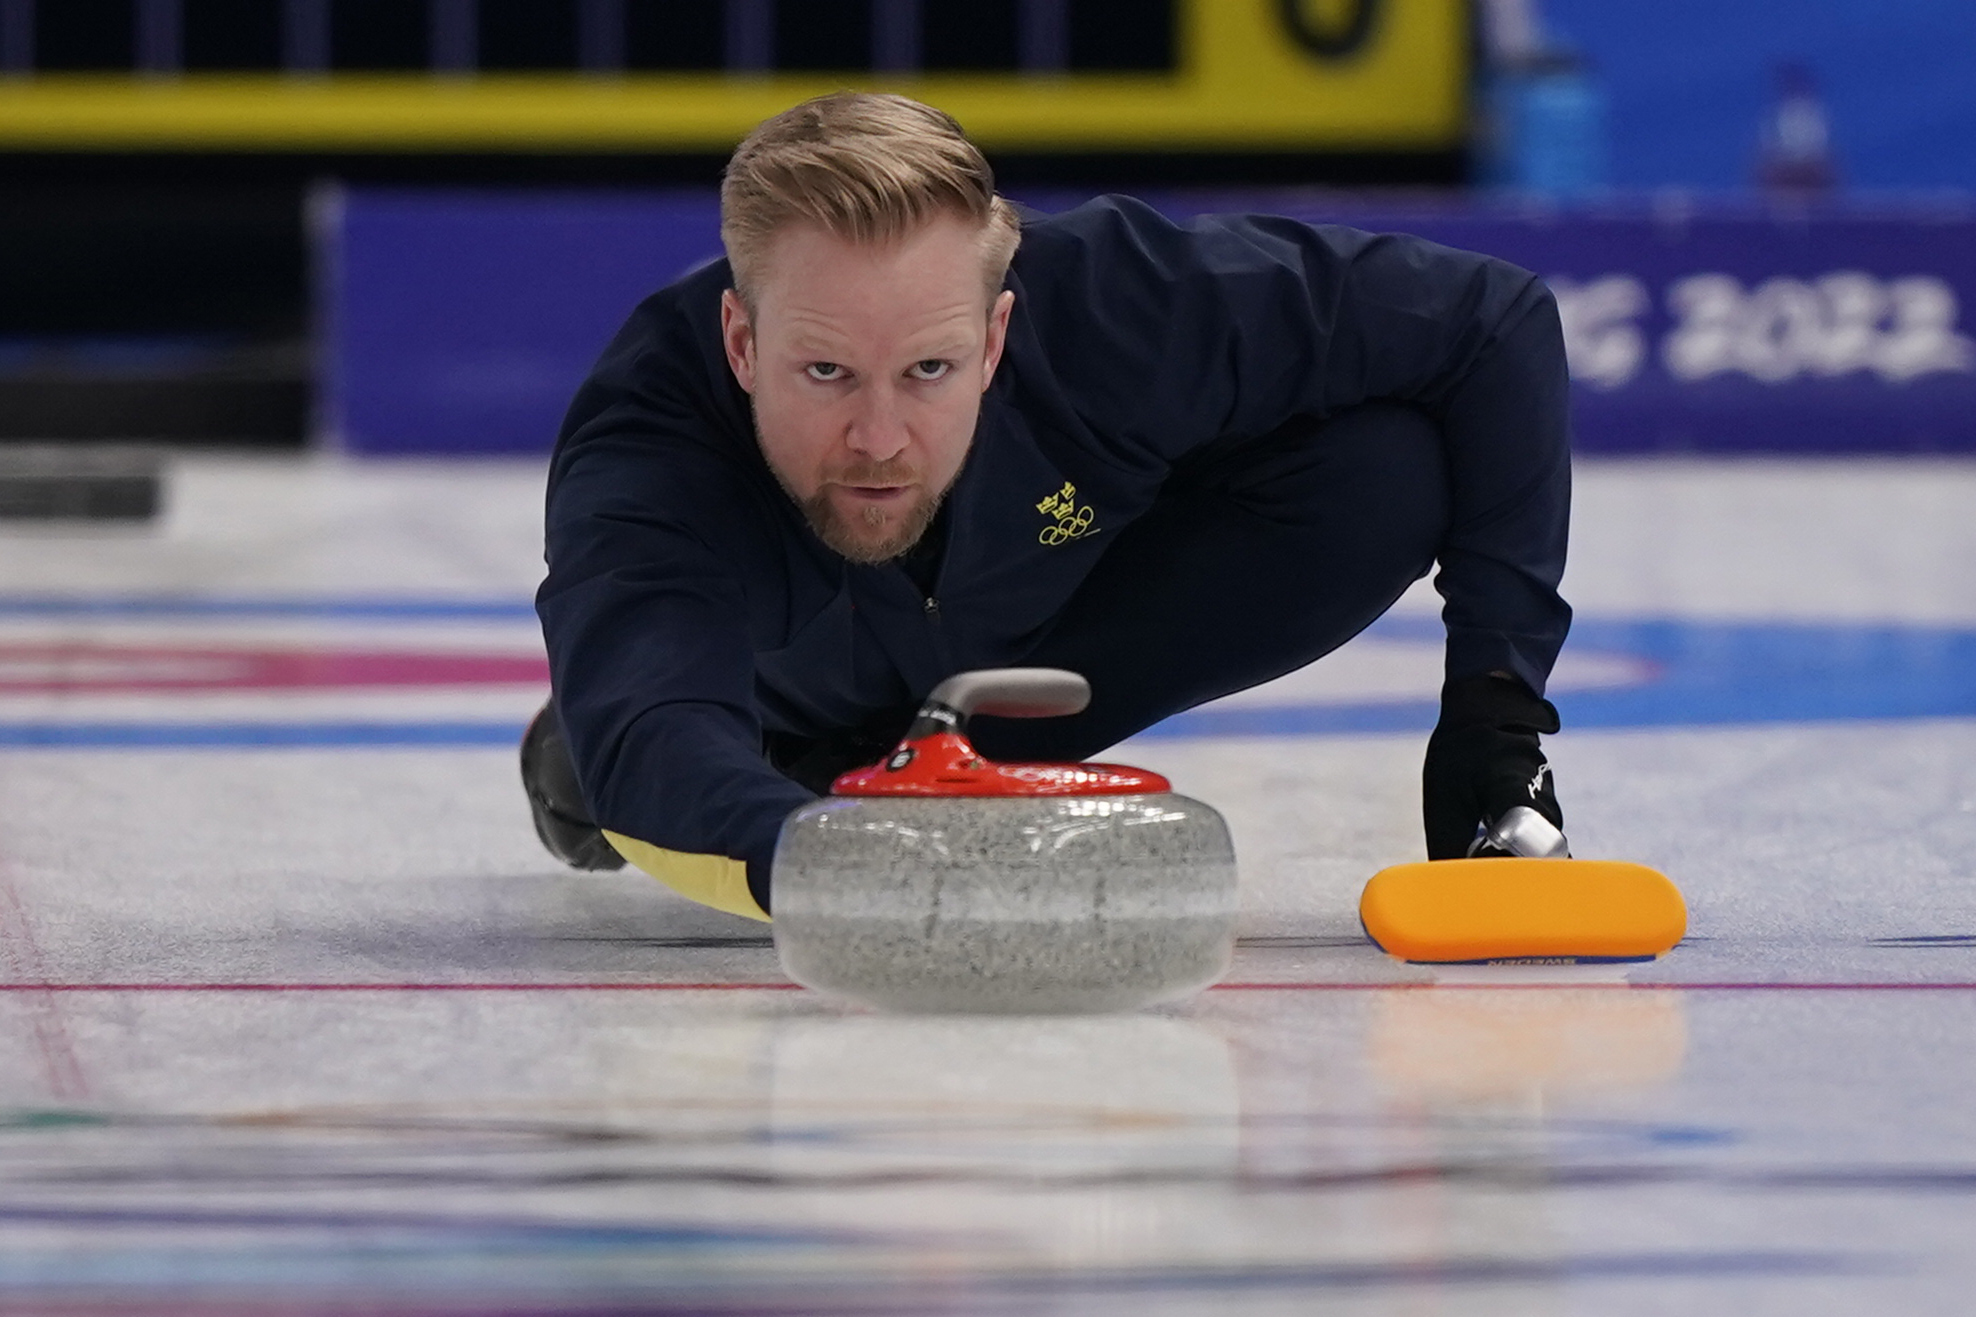 Olympics mens curling gold medal game Live stream, start time, TV, how to watch Great Britain vs